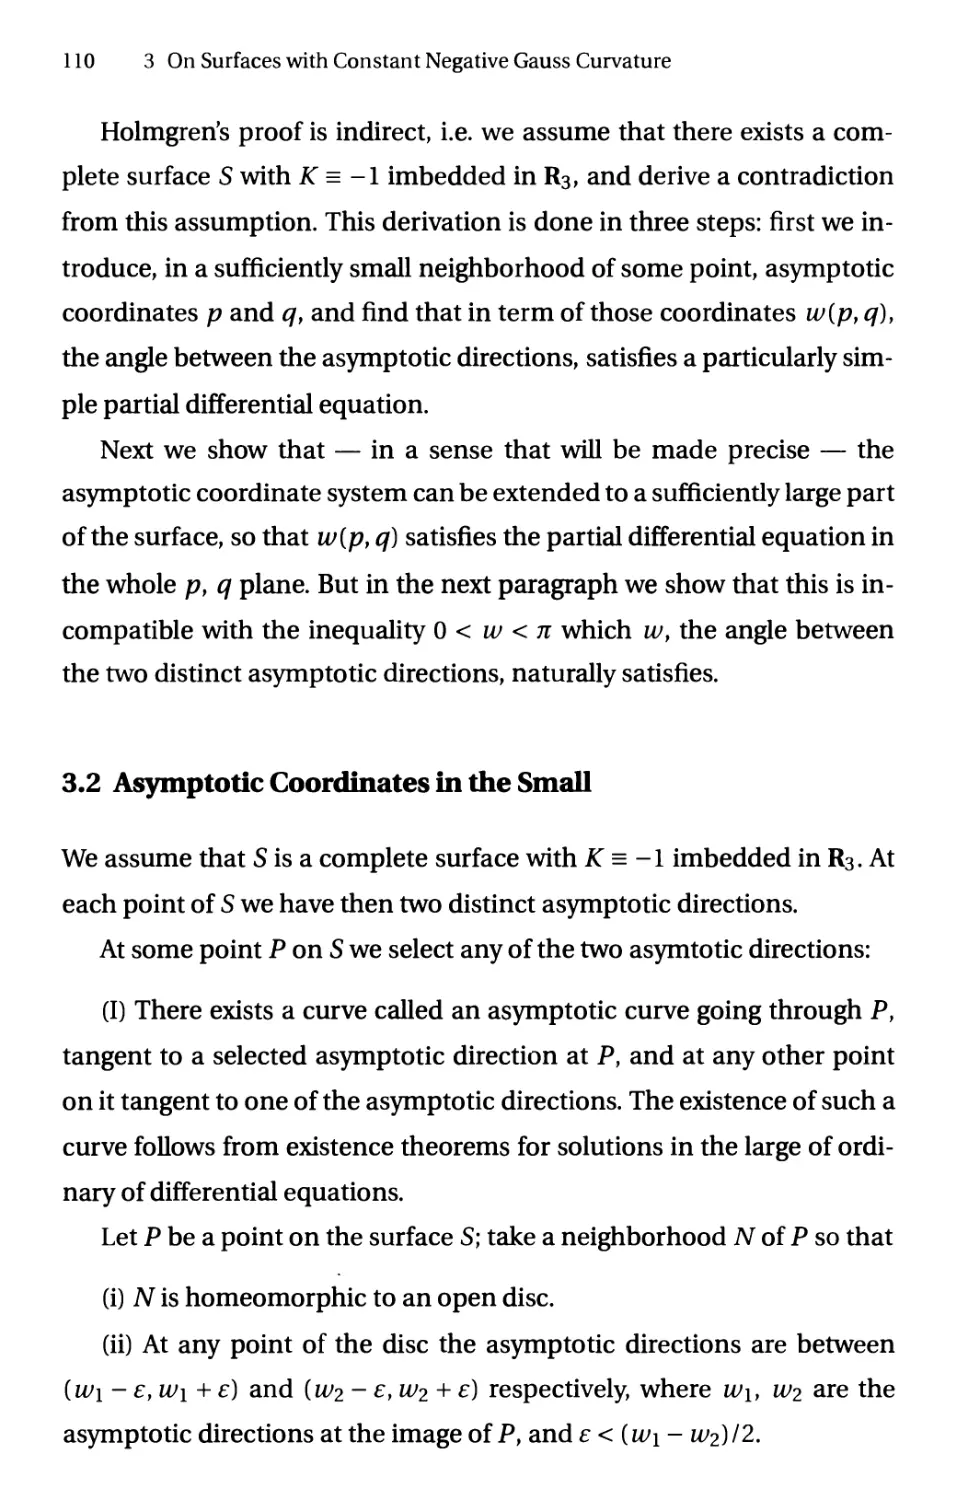 3.2 Asymptotic Coordinates in the Small